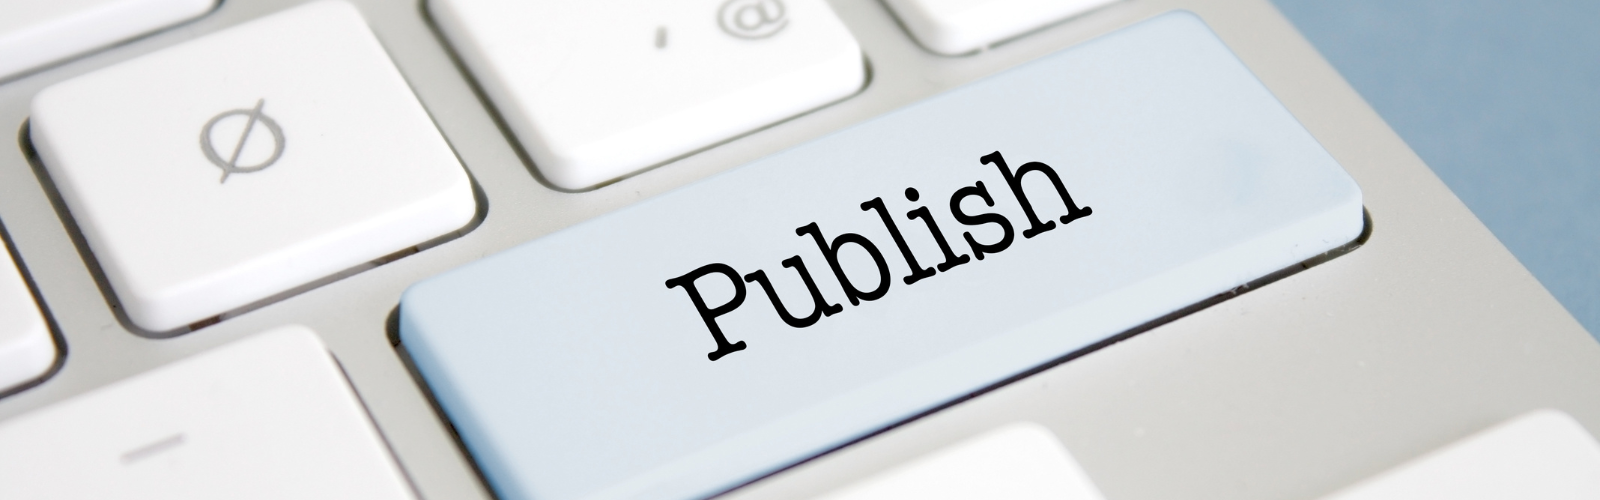 Awards and Publishing Your Research